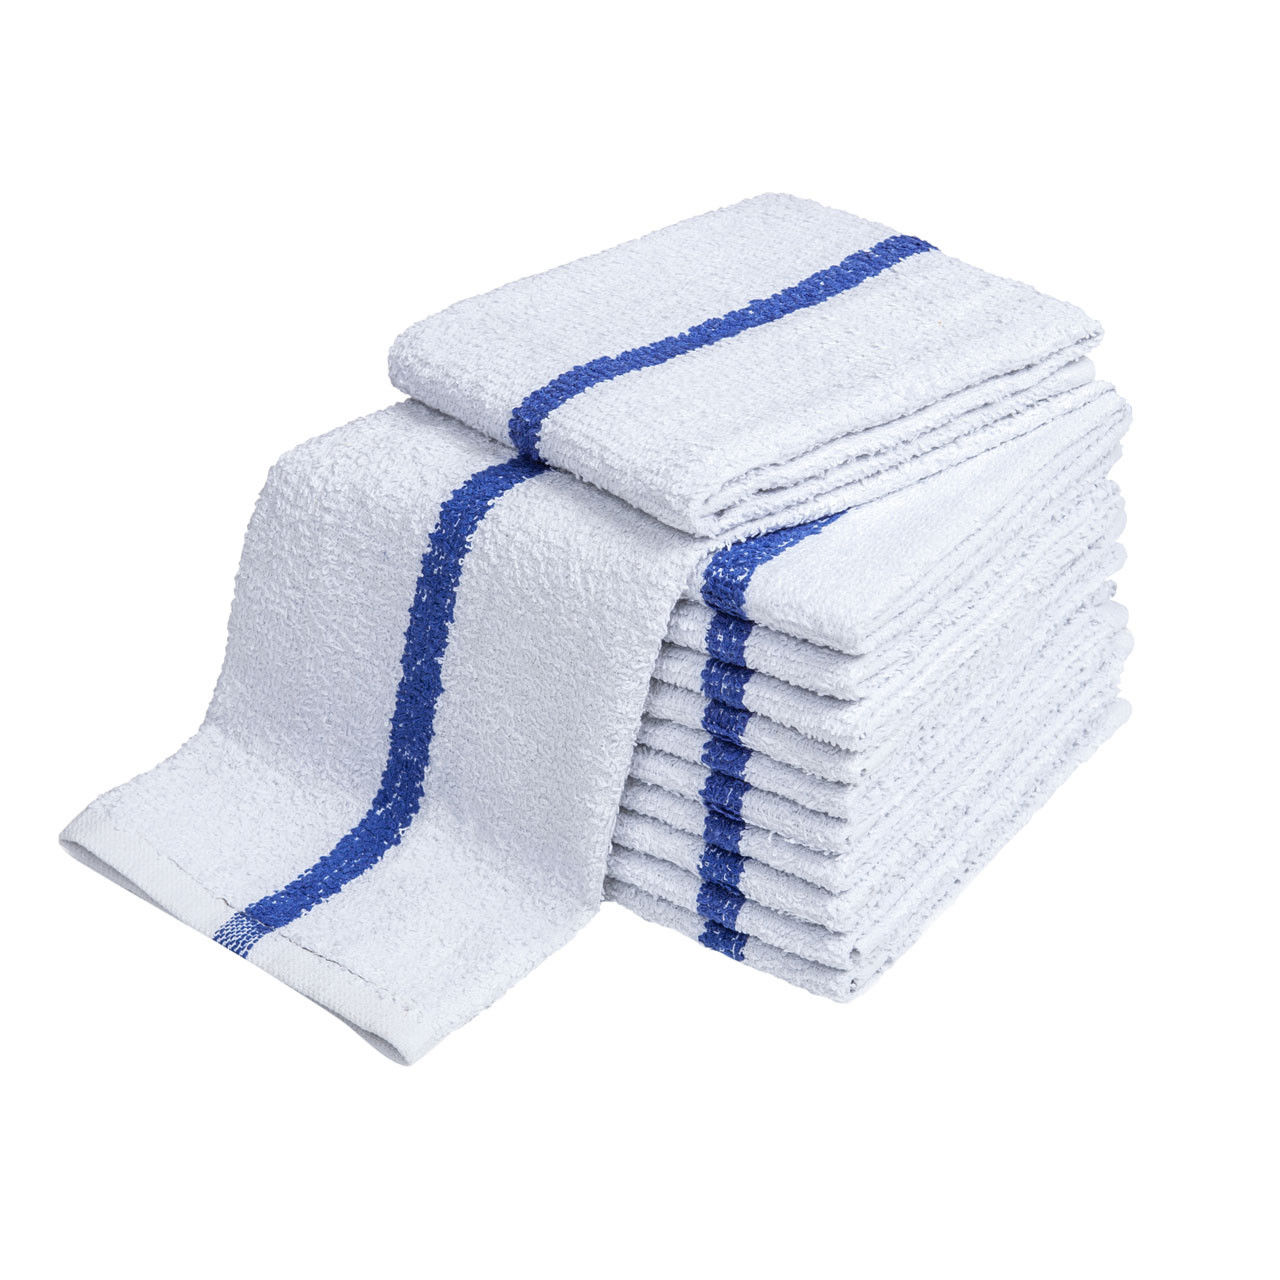 Can you specify the material used in the making of ADI Center Striped Bar Towels?